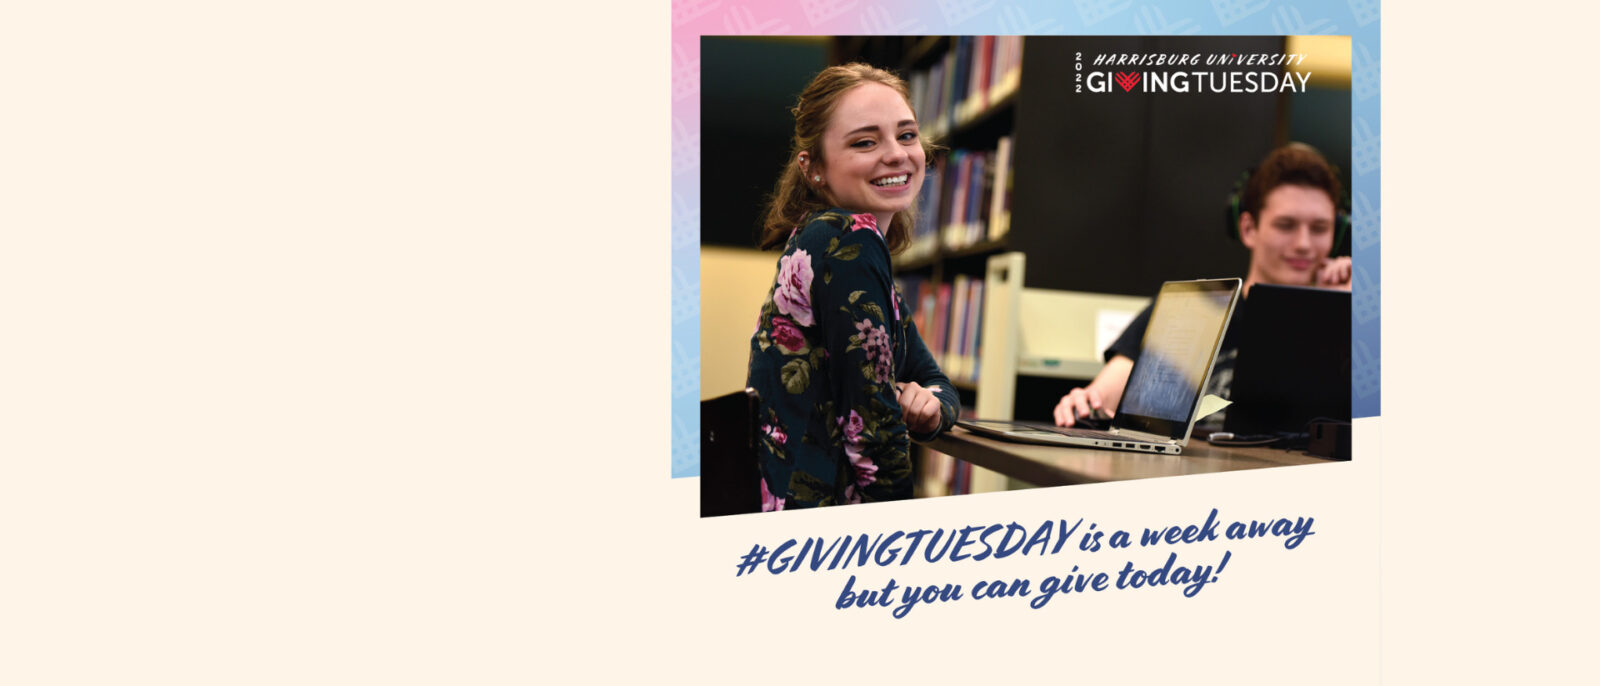 <strong>Join us this Giving Tuesday</strong>